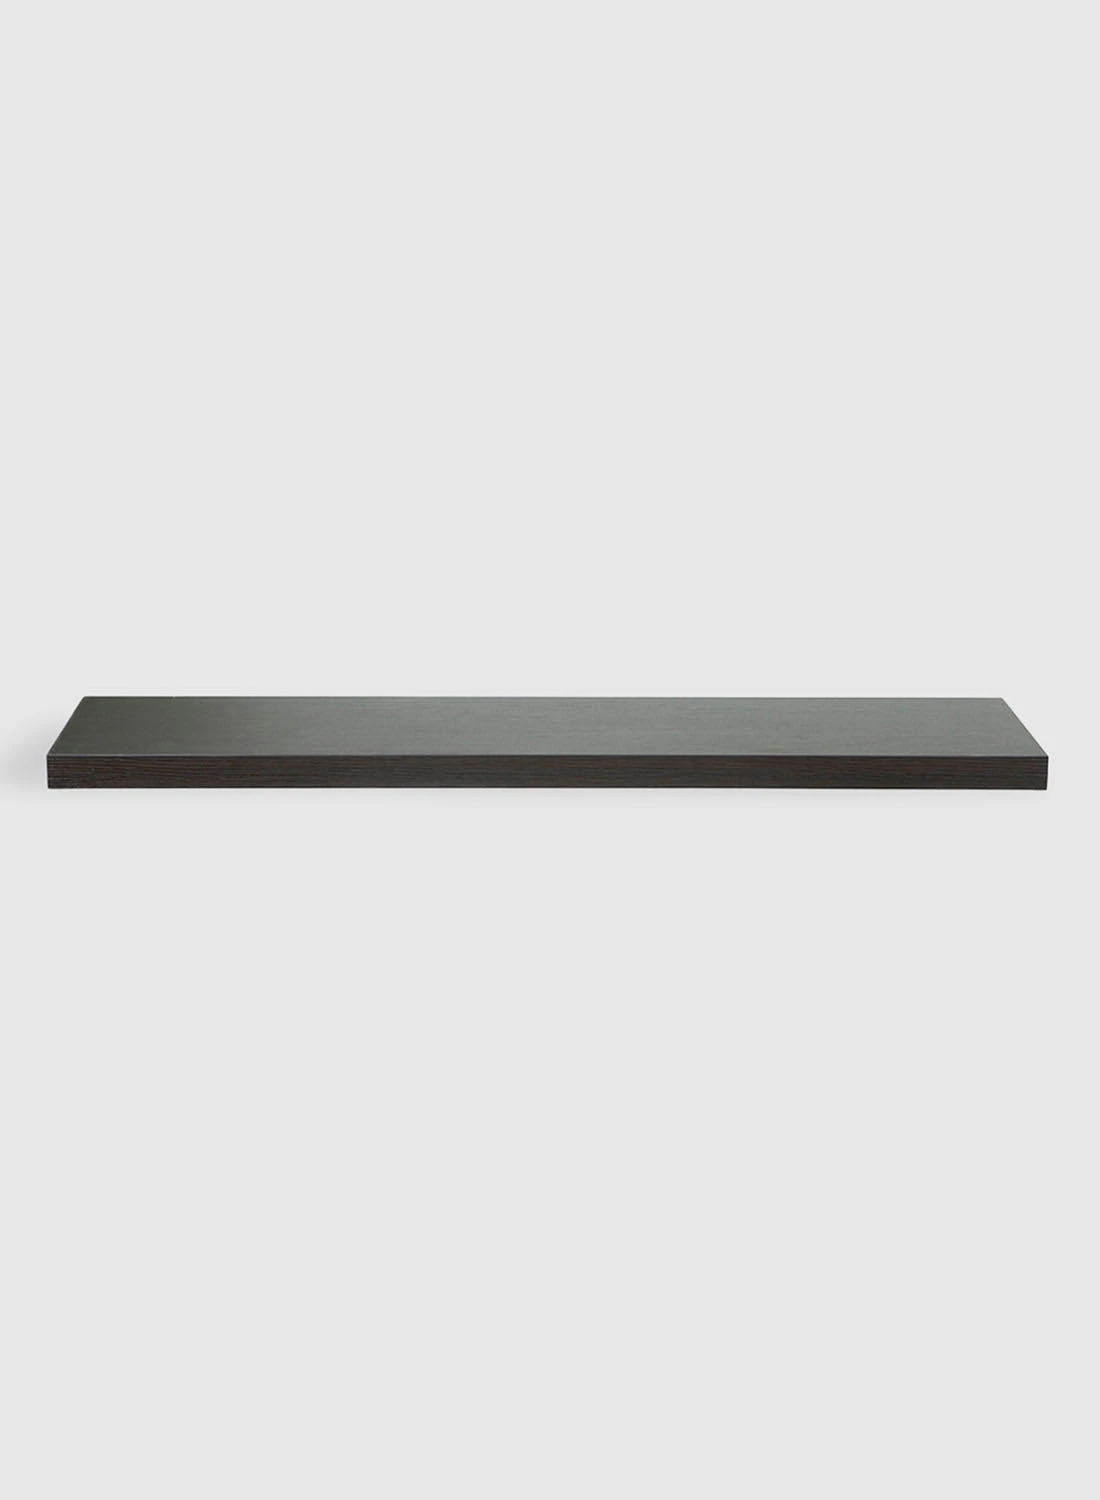 Switch Simply Decorative Floating Wooden Wall Shelf  For Bedroom Decor Stylish Space Saver Simple Installation Black 1100*260*39mm